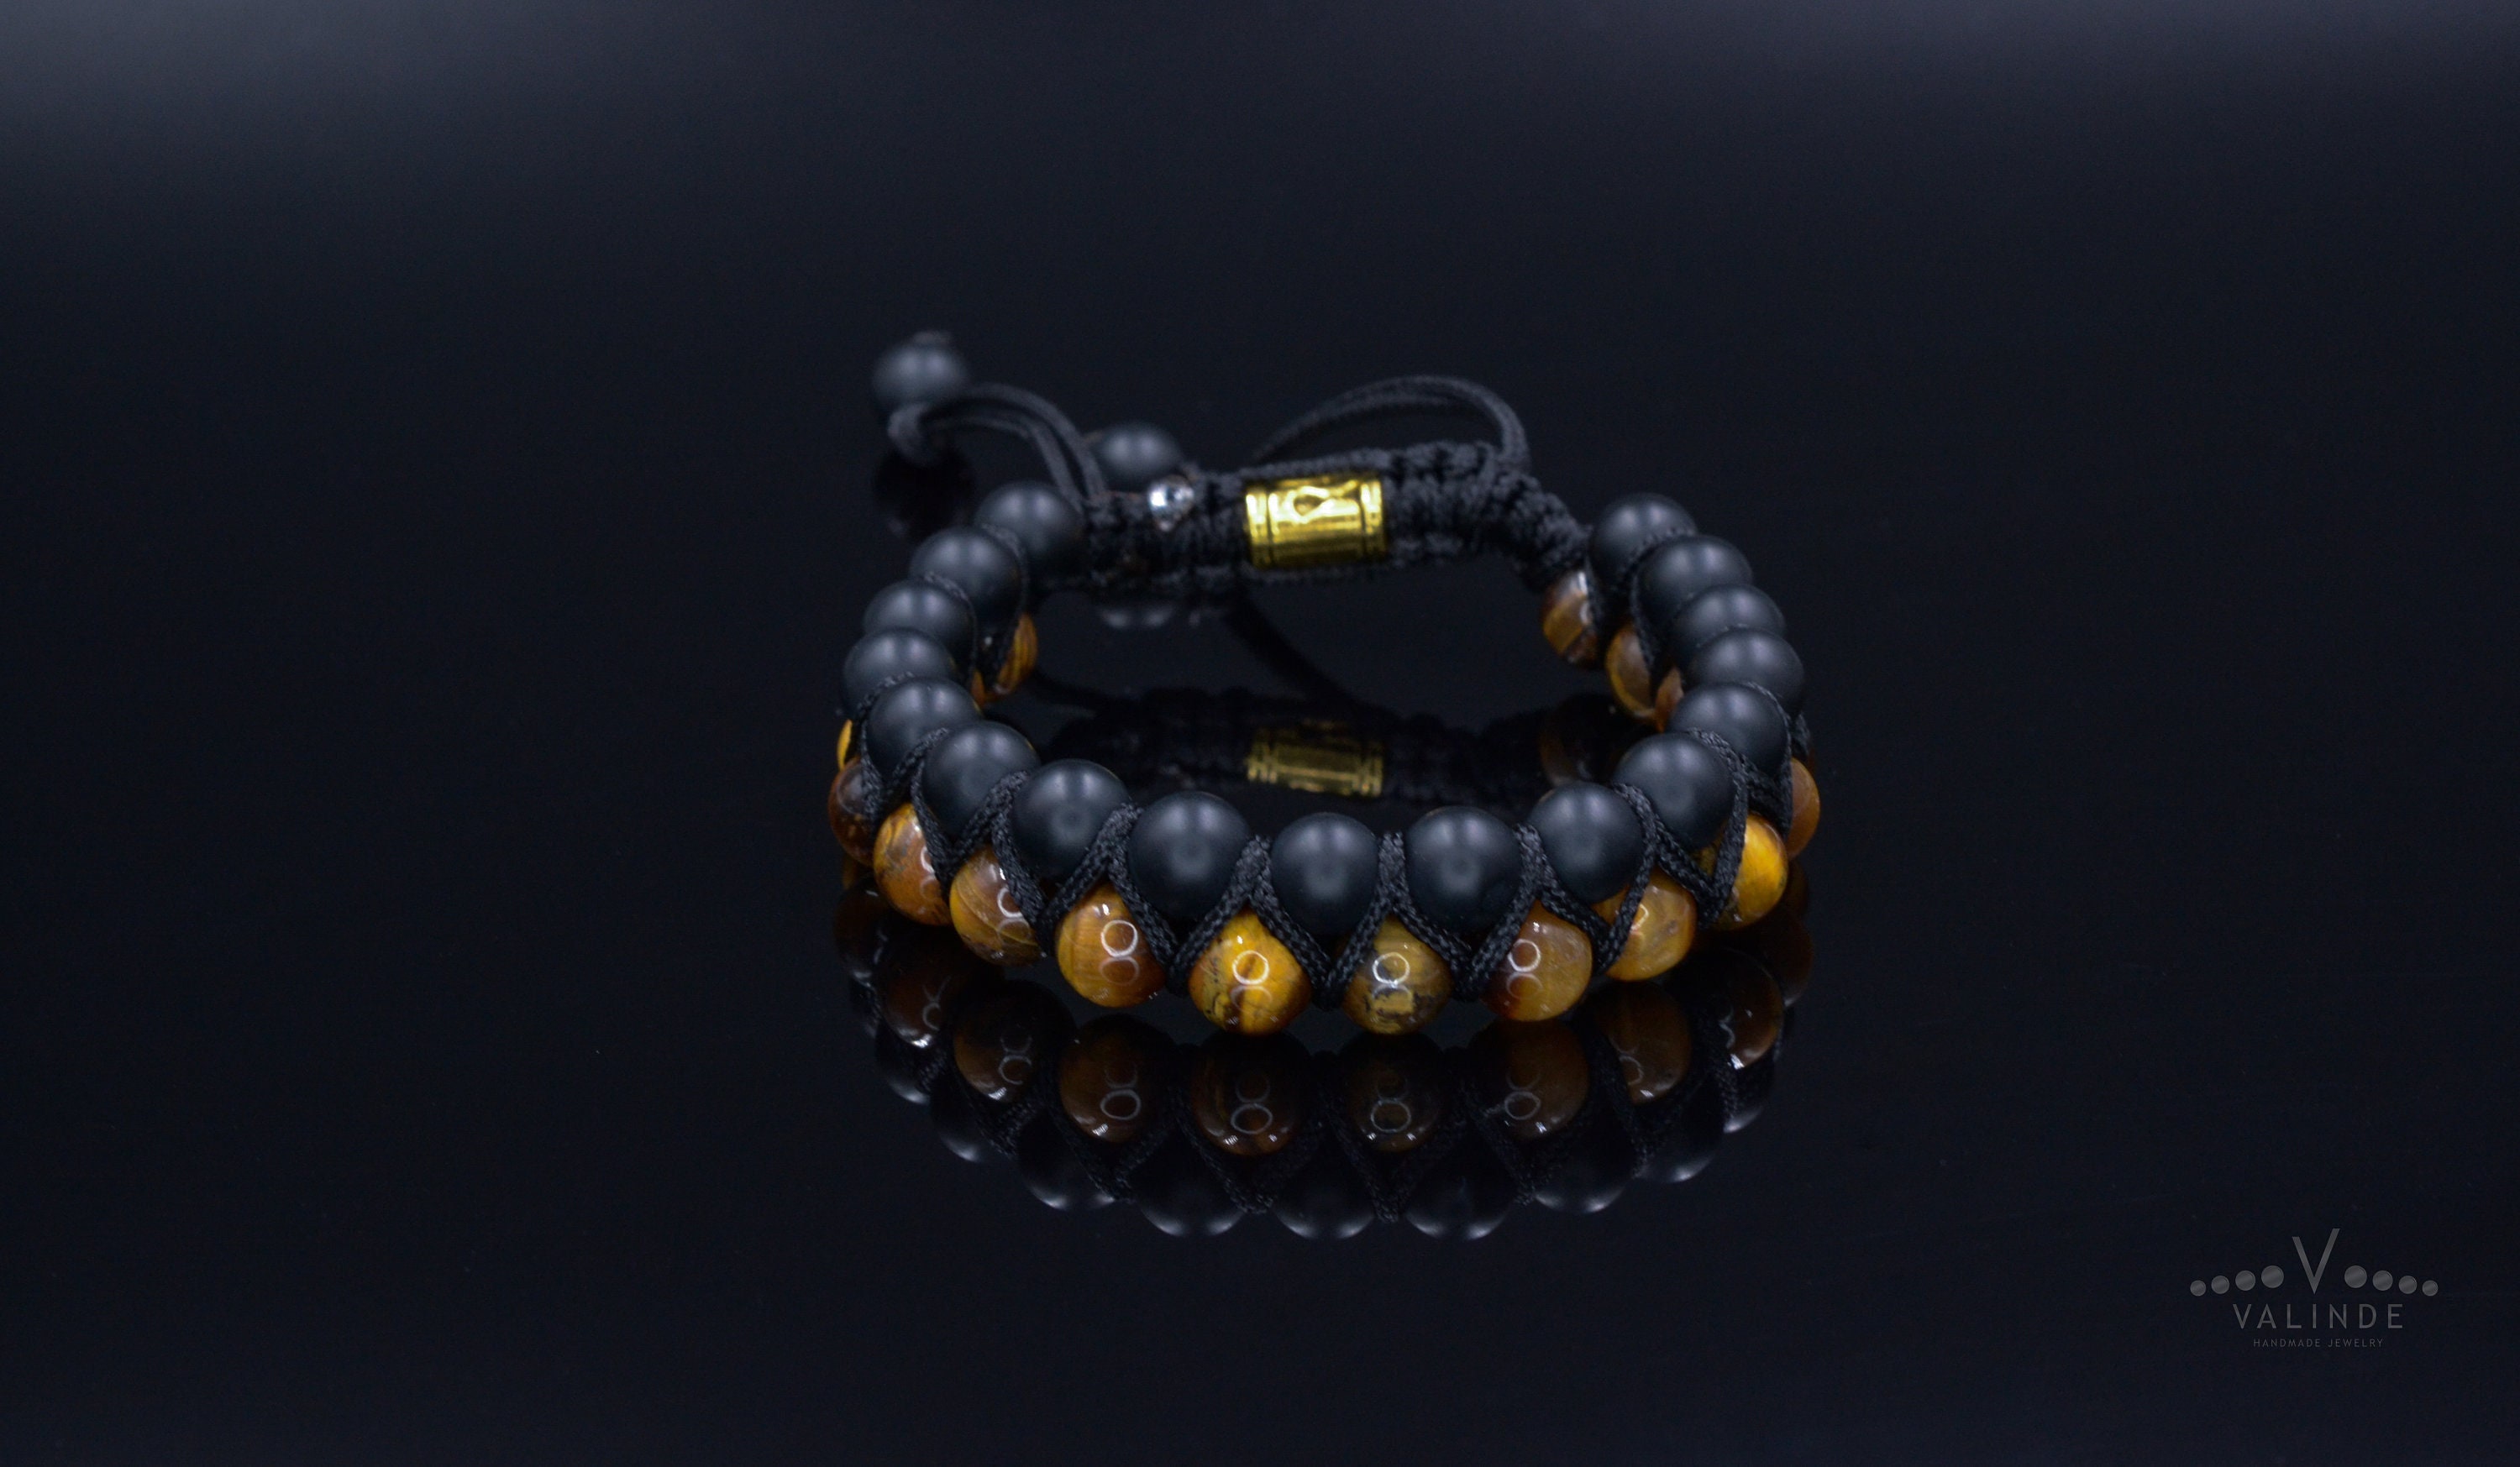 Dropship 4PCS Bead Bracelet For Men Women Black Matte Onyx Tiger Eye Crown  King Panther Charm Elastic Lava Rock Volcanic Stone Beads Set Adjustable to  Sell Online at a Lower Price